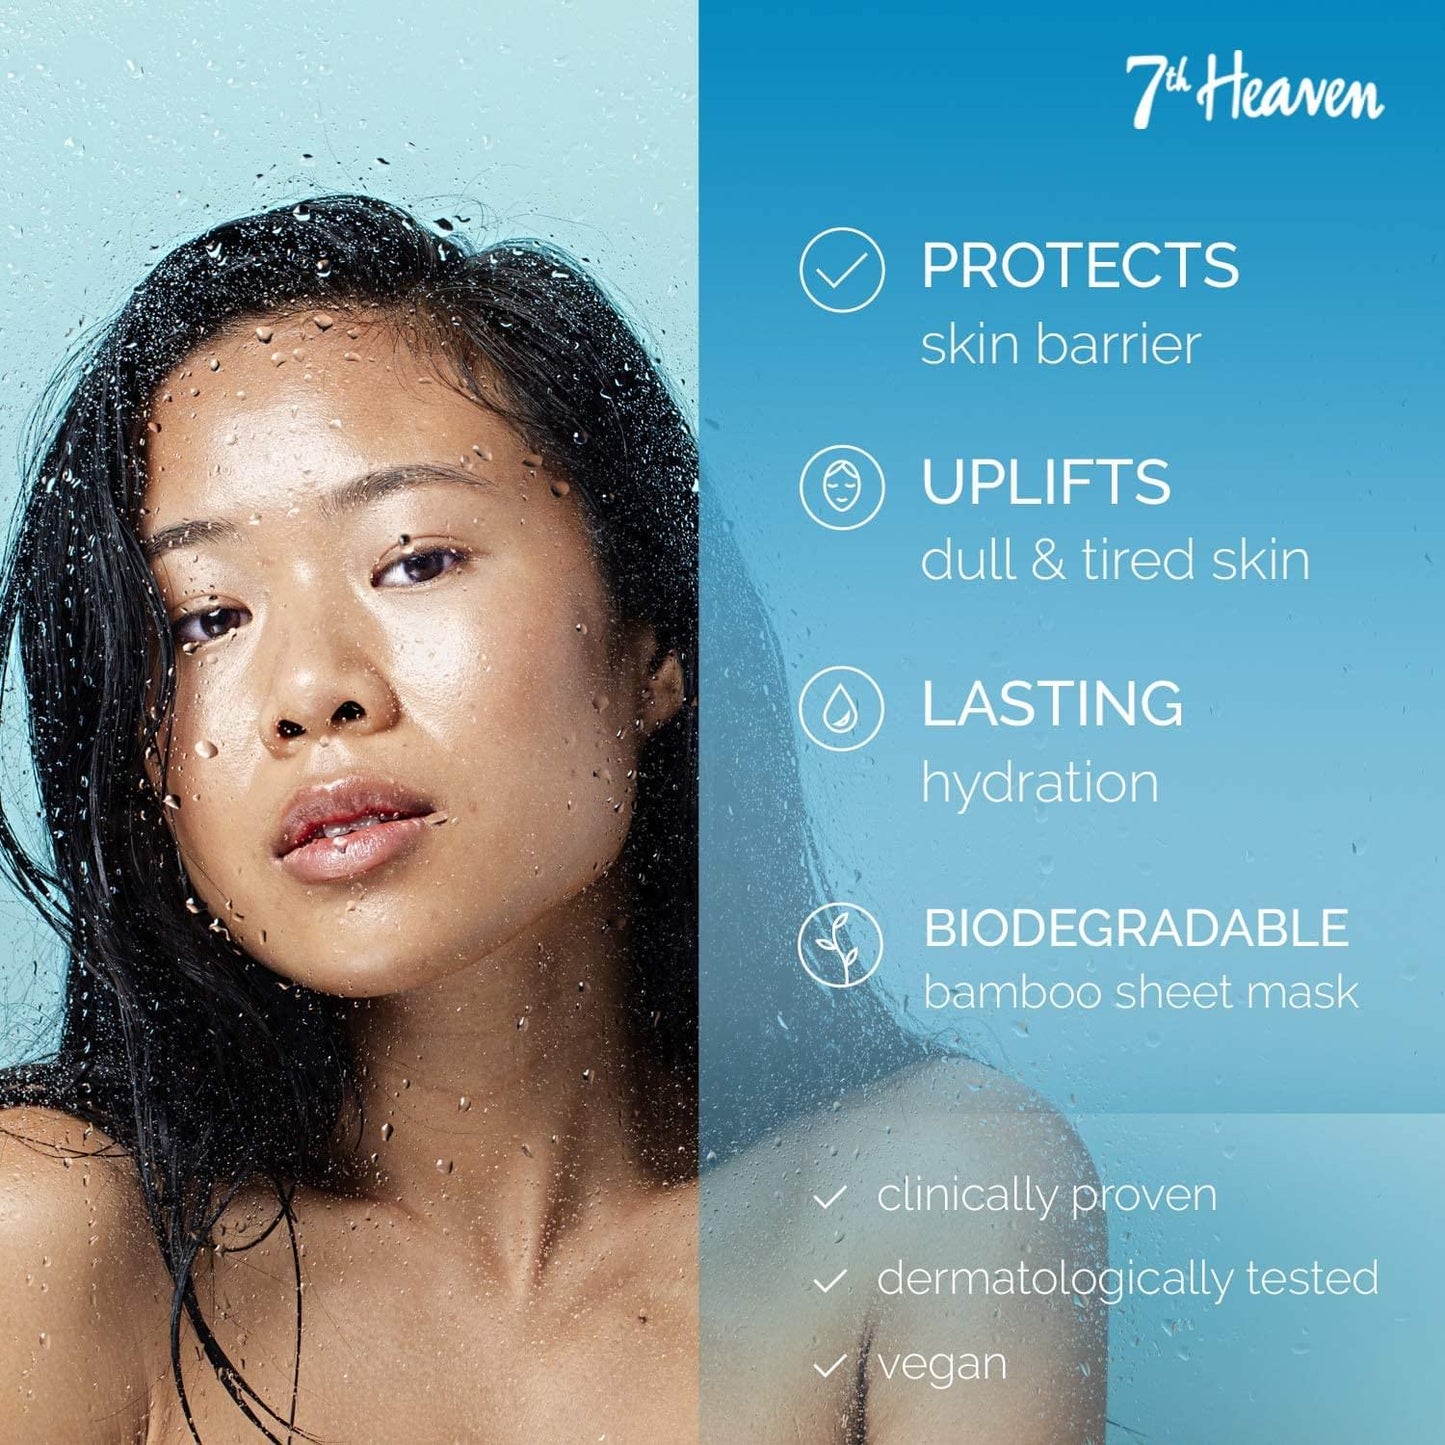 7th Heaven '24 Hour Hydration' Anti-Pollution Biodegradable Bamboo Sheet Mask